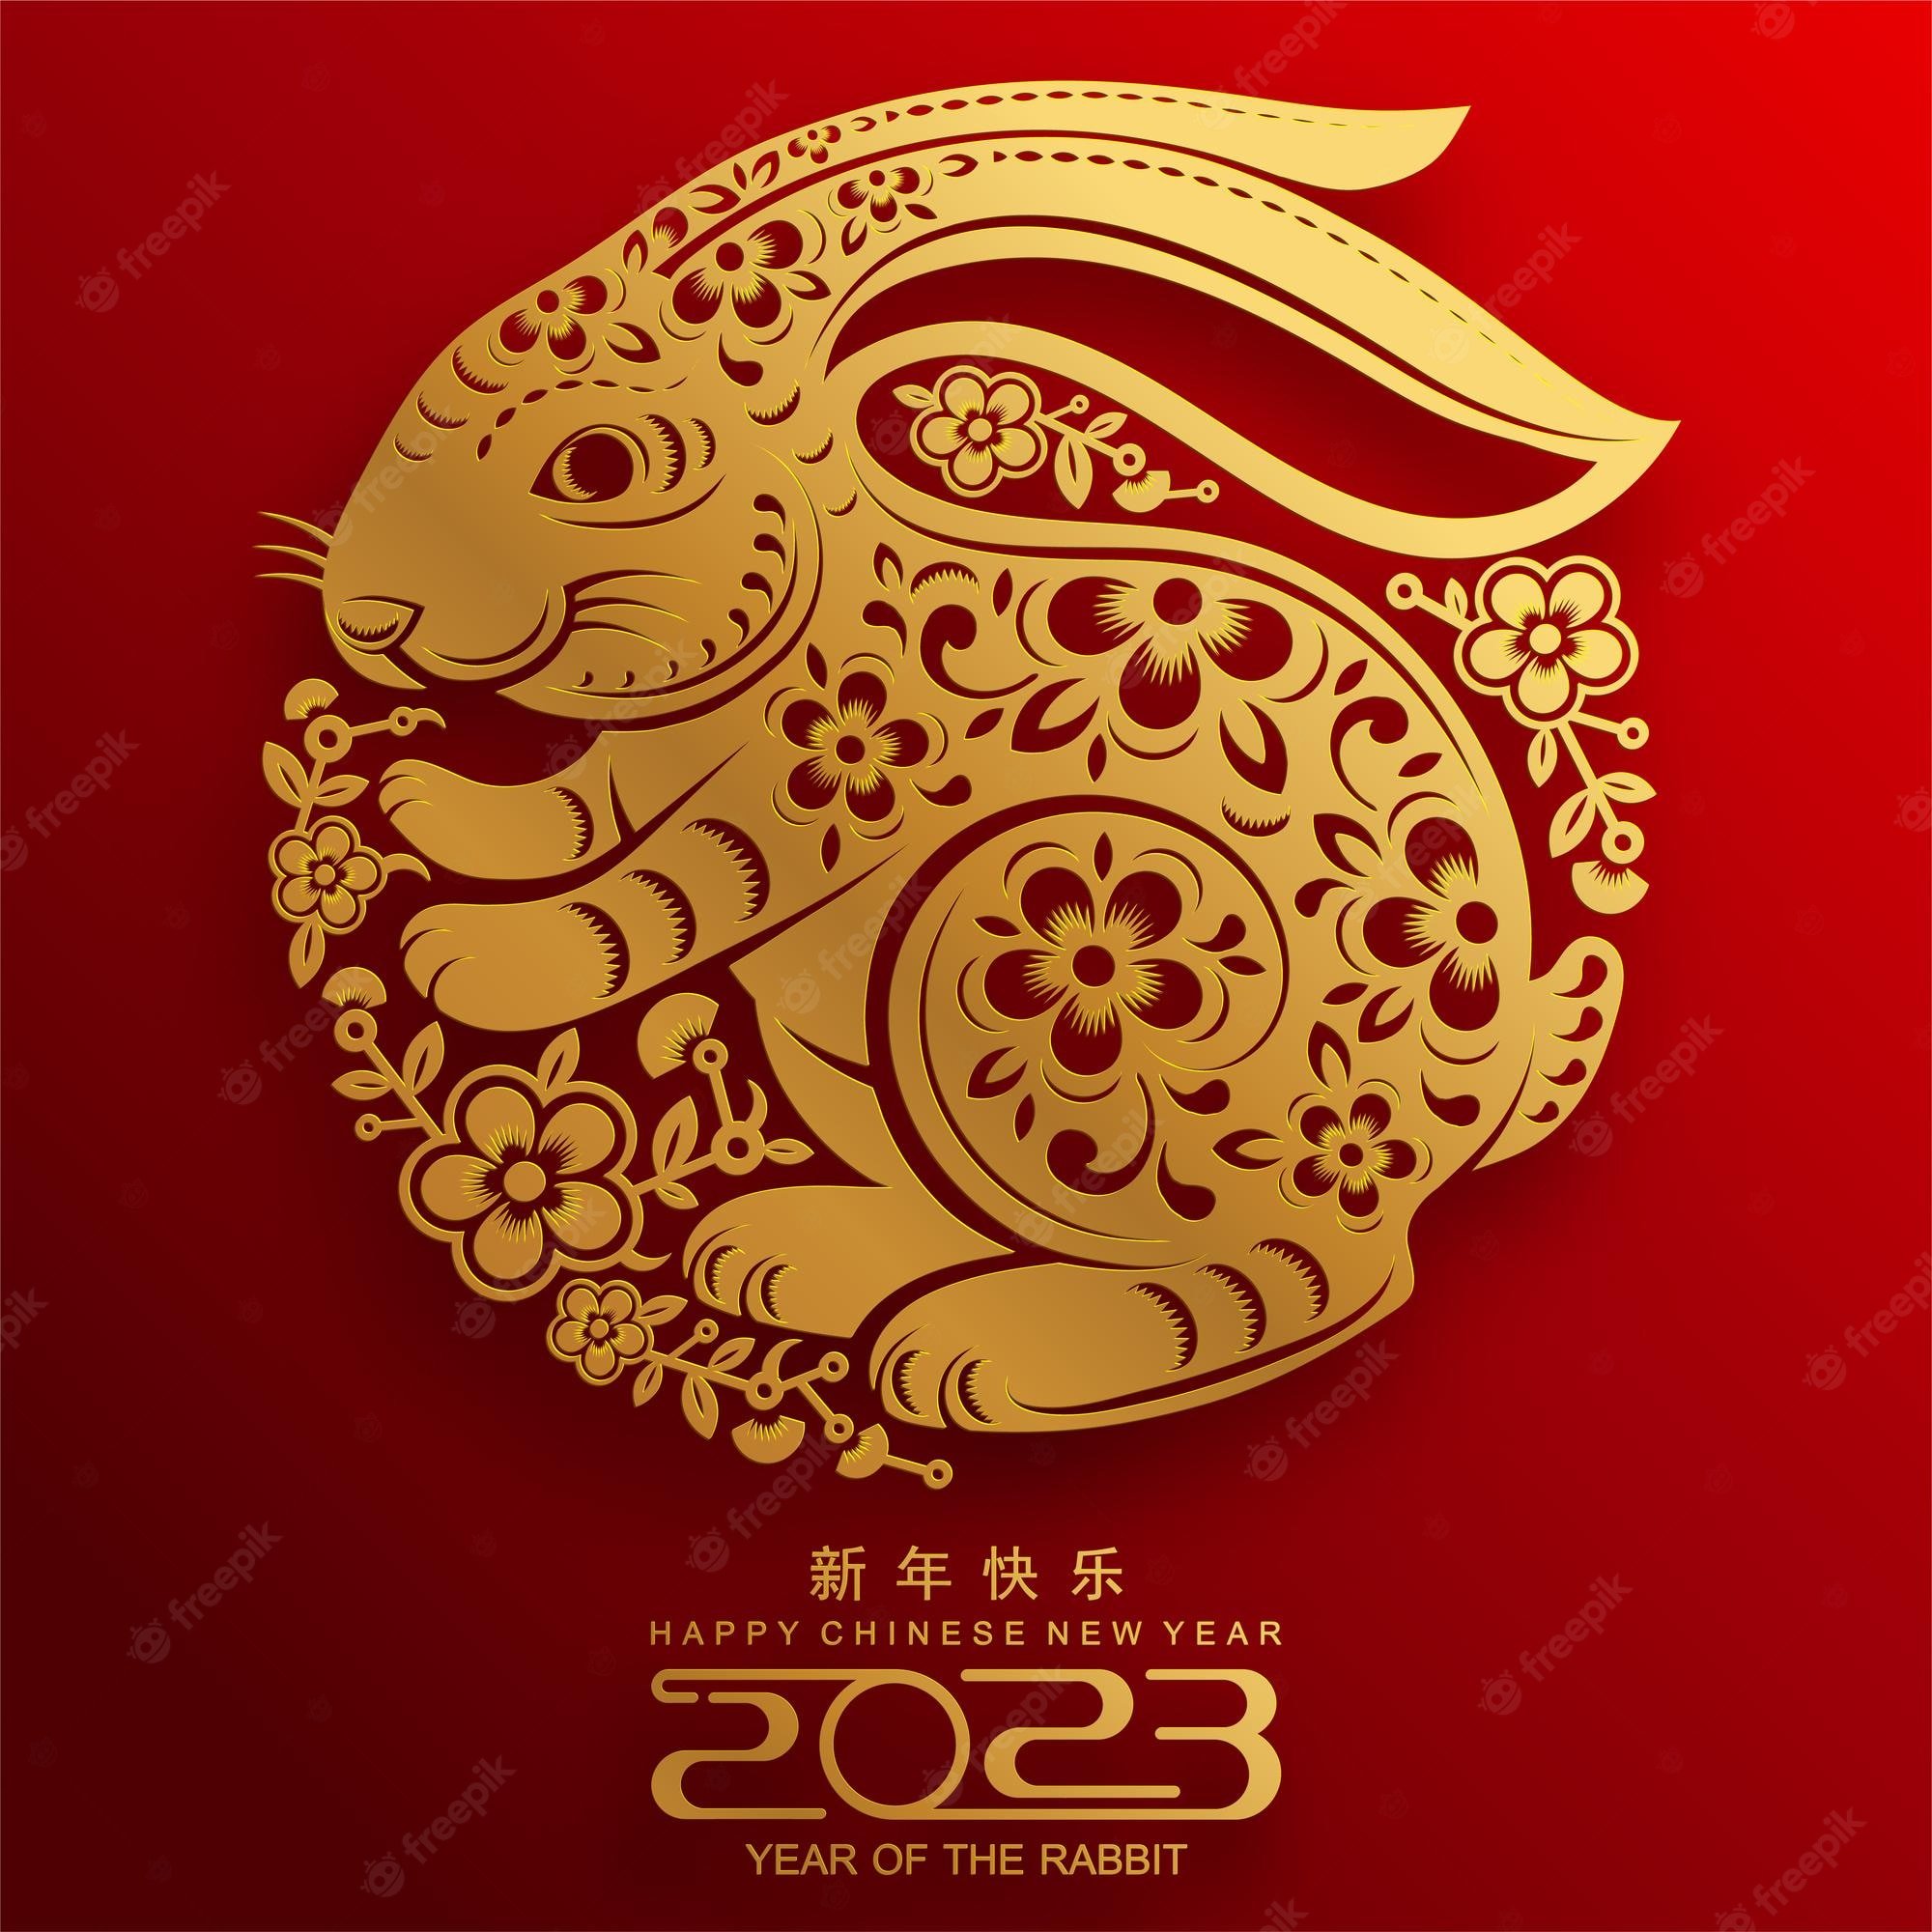 Year of the rabbit Image. Free Vectors, & PSD